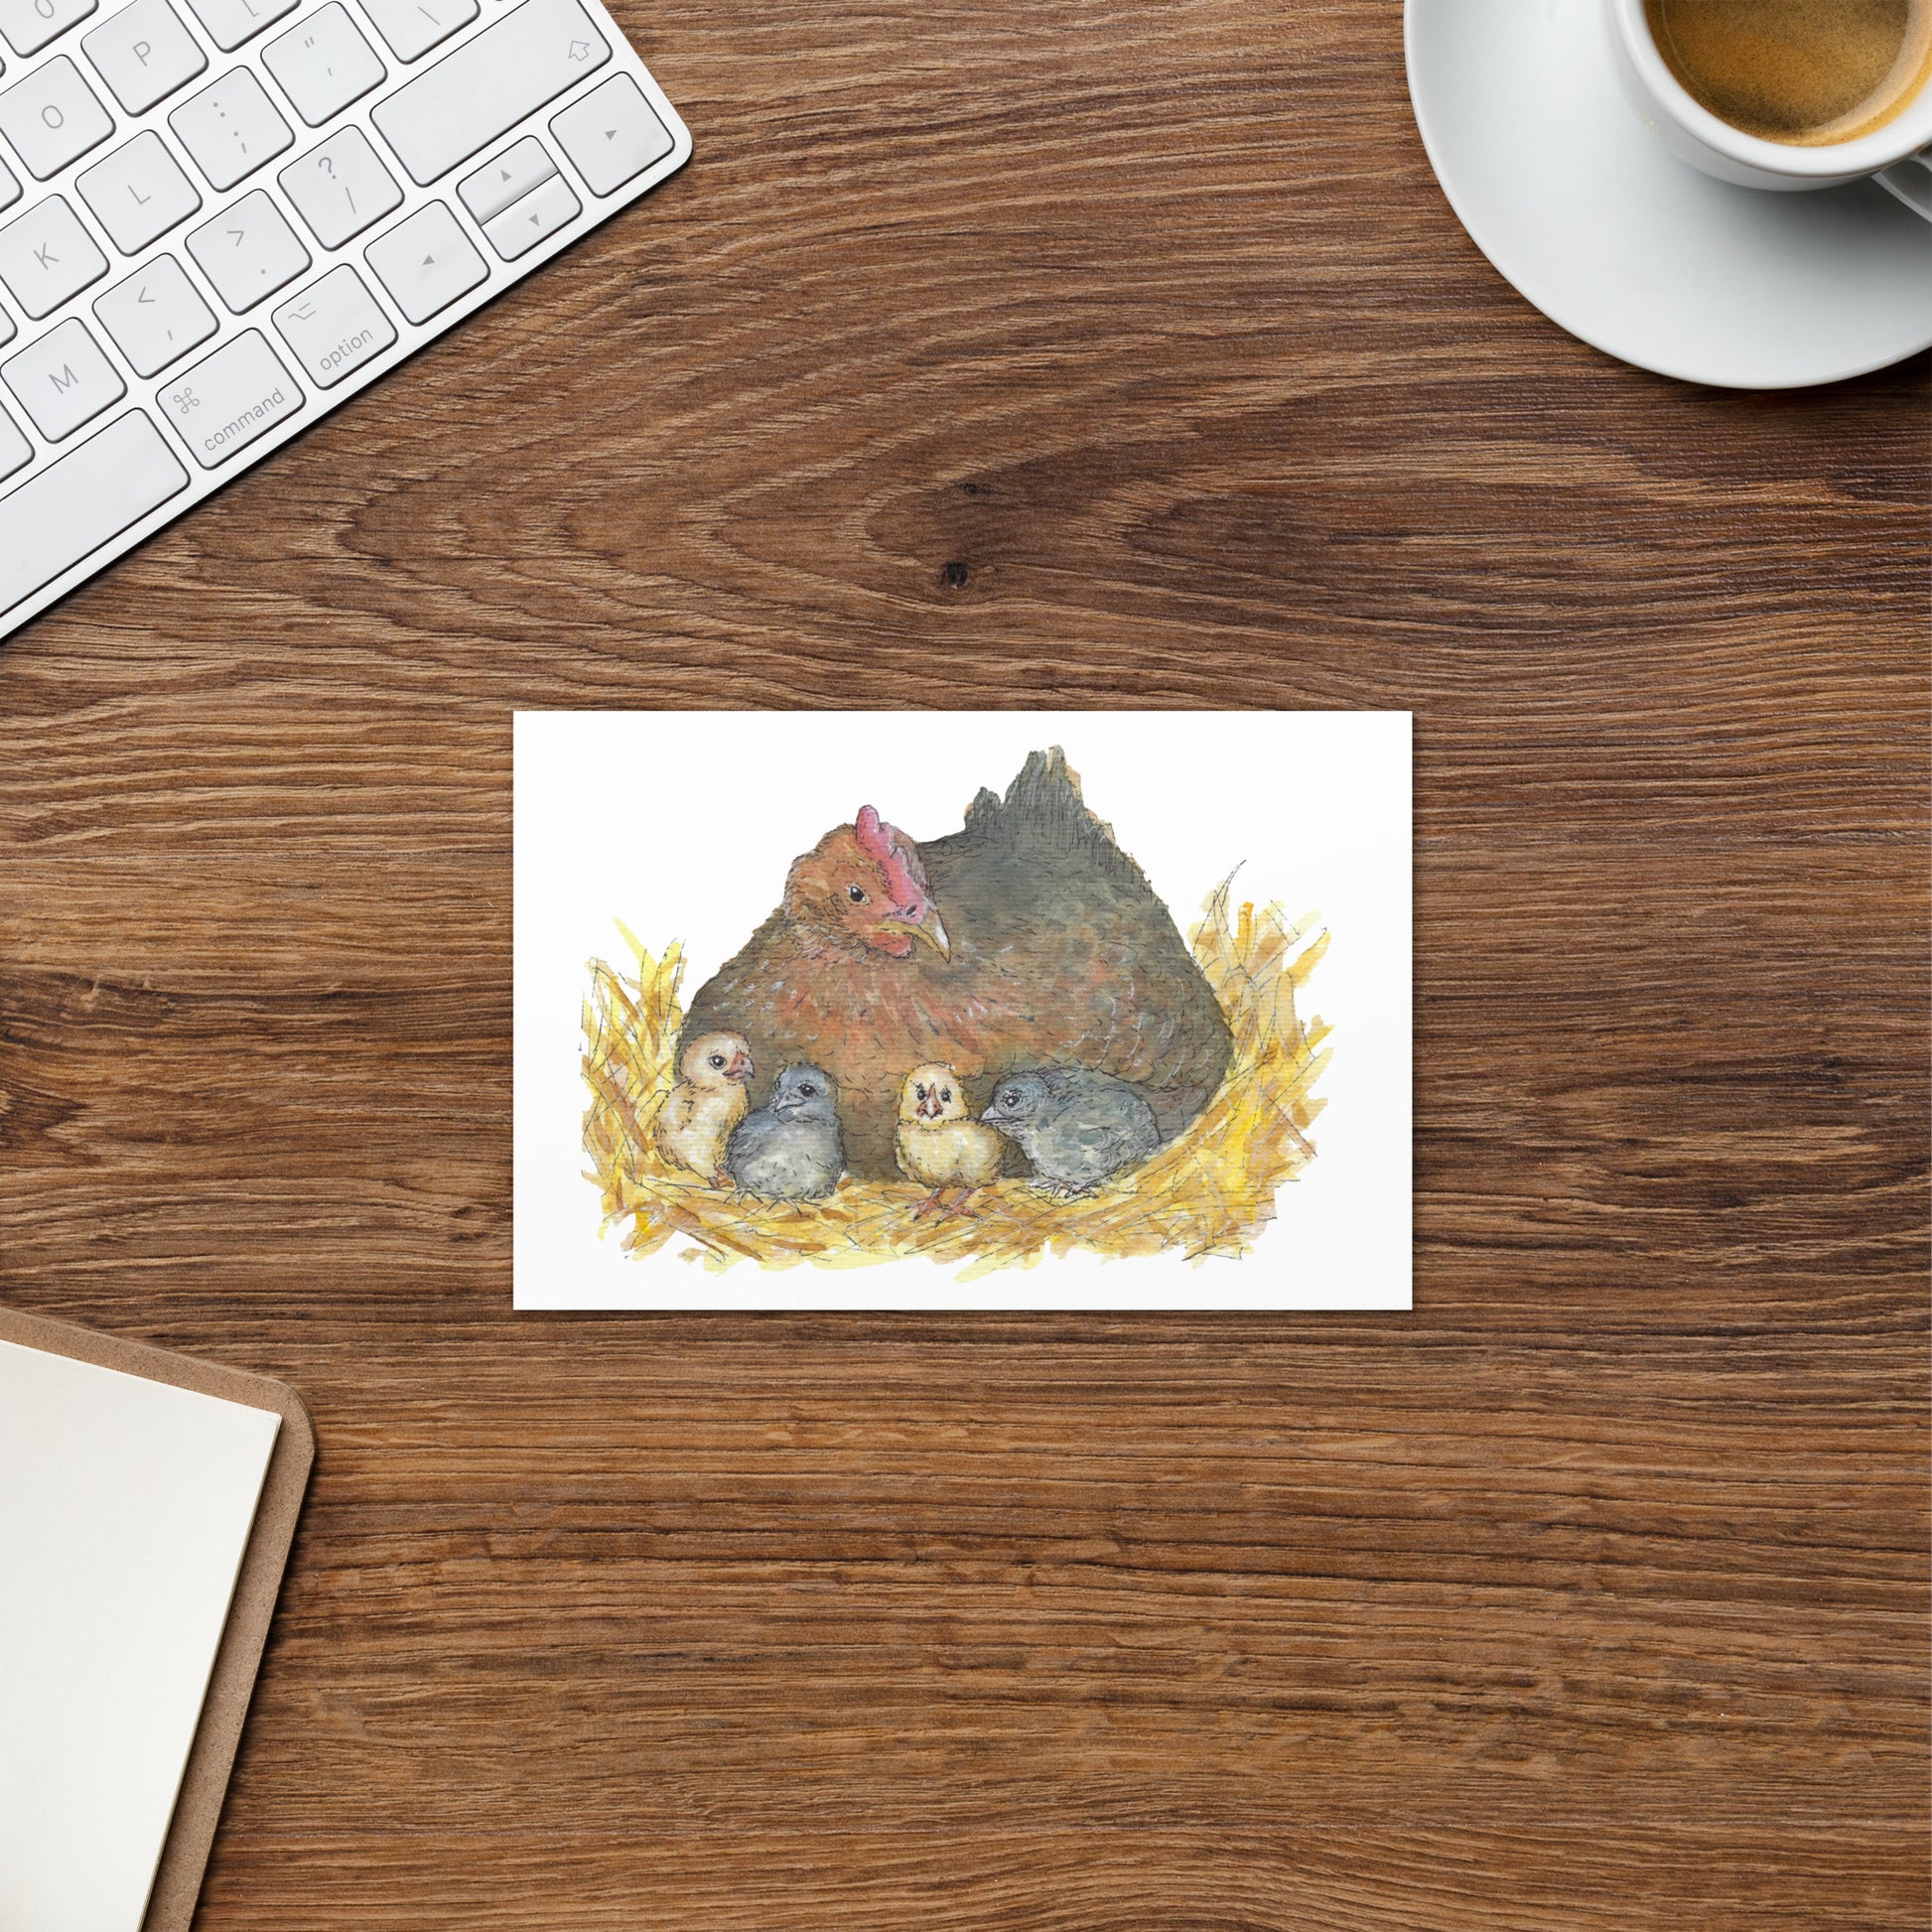 4 by 6 inch greeting card and envelope. Front features watercolor print of a mother hen and four chicks in a nest. Inside is blank. Shown on wooden table by coffee cup and keyboard.